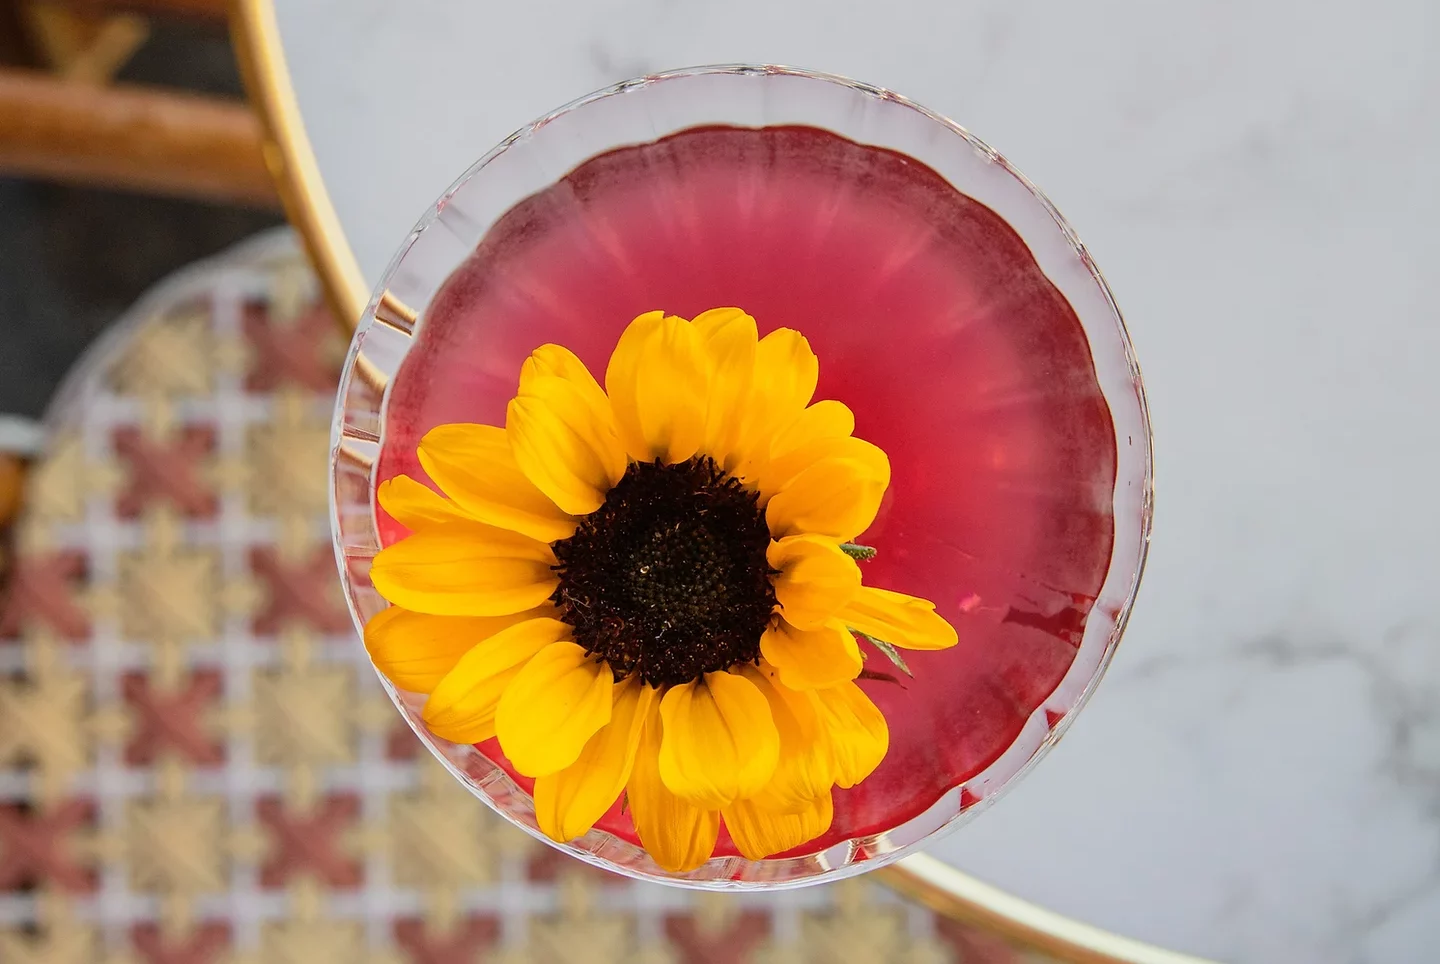 A customized pink cocktail with a decorative sunflower served at Bisou, a sustainable bar in Paris.